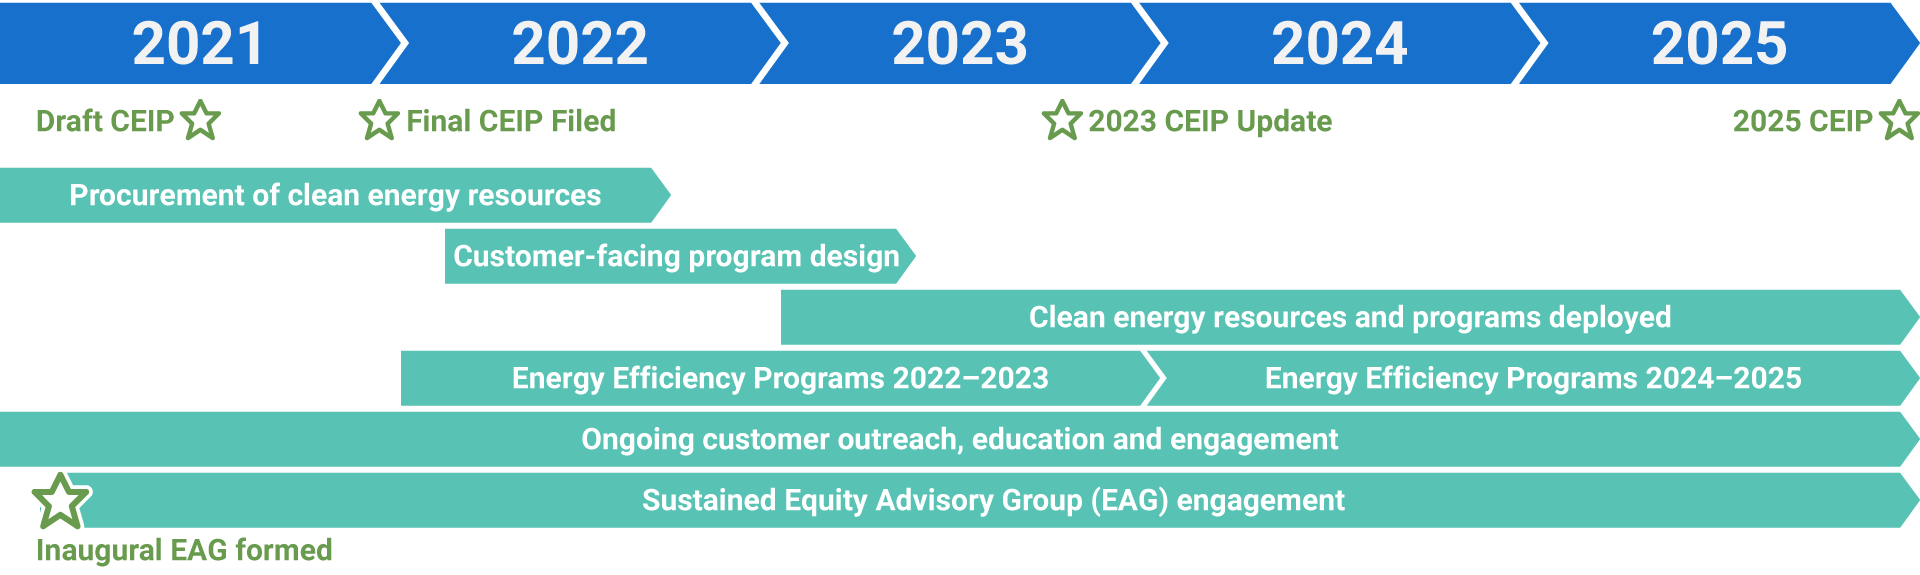 Visual timeline depicting the start of of the CEIP process in 2021, final  in 2022, update in 2023 and the 2025 updated CEIP.